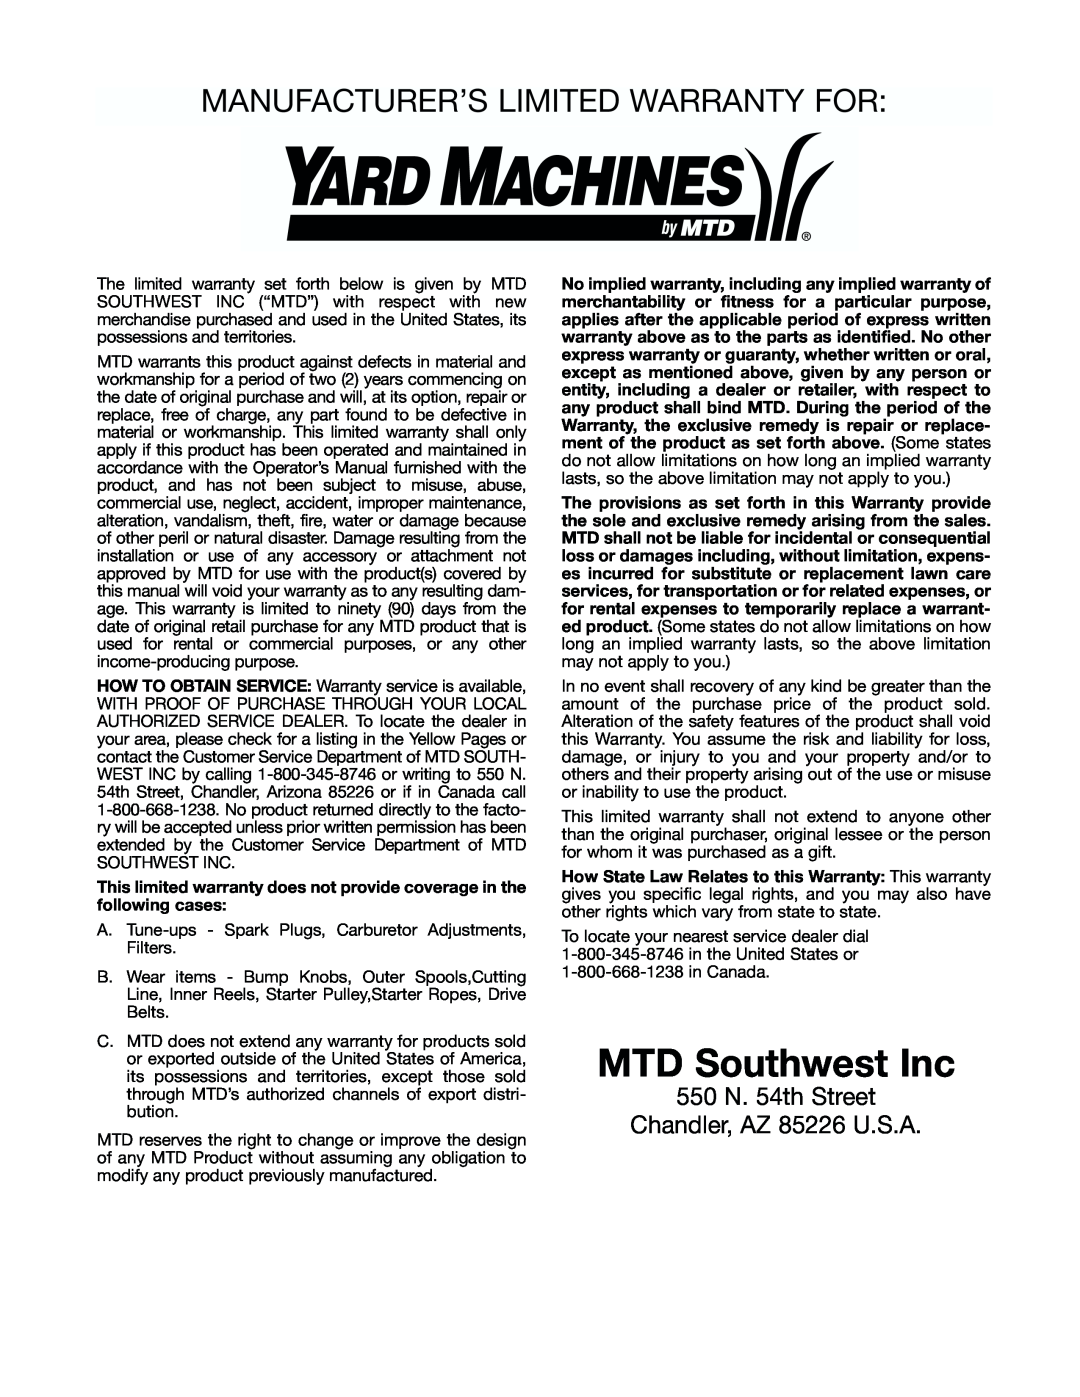 Yard Machines 41AD-280G000 manual MTD Southwest Inc, Manufacturer’S Limited Warranty For 